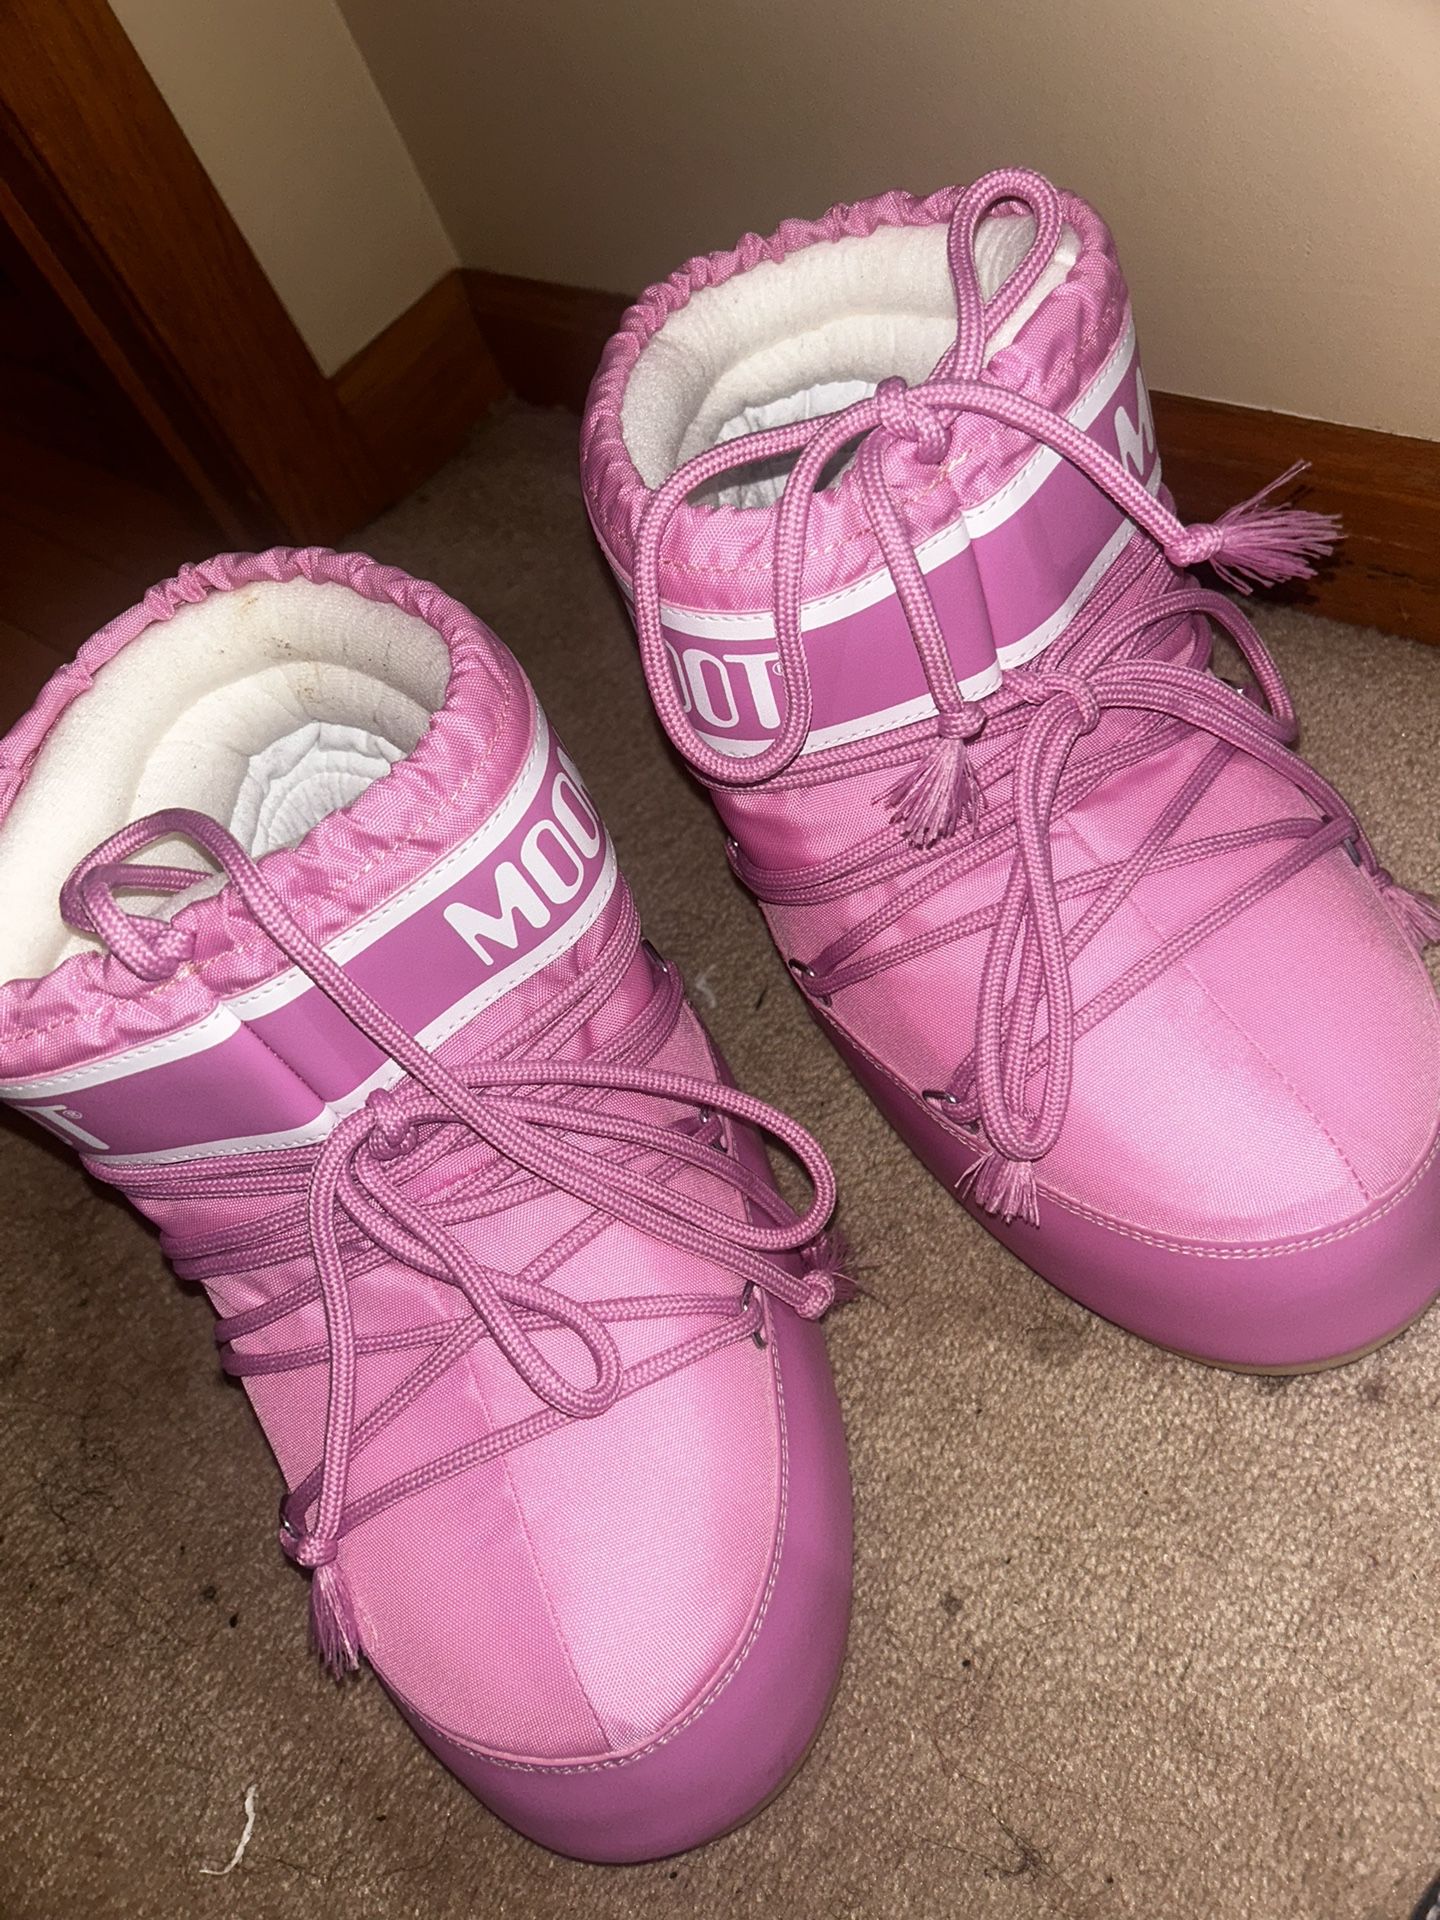 PINK MOON BOOTS